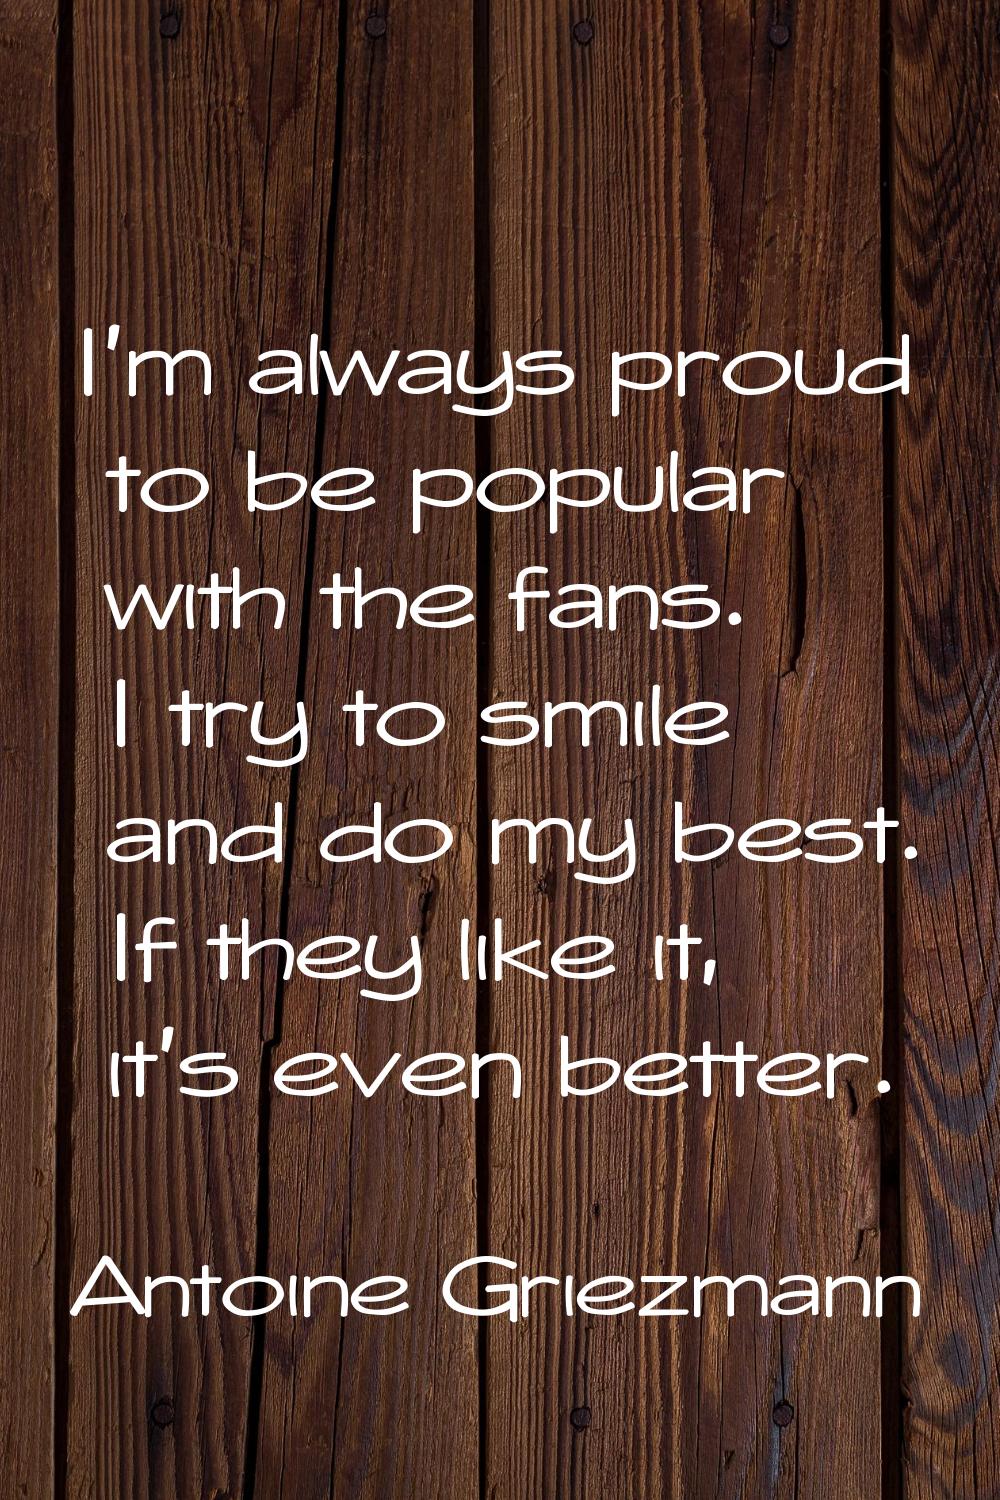 I'm always proud to be popular with the fans. I try to smile and do my best. If they like it, it's 